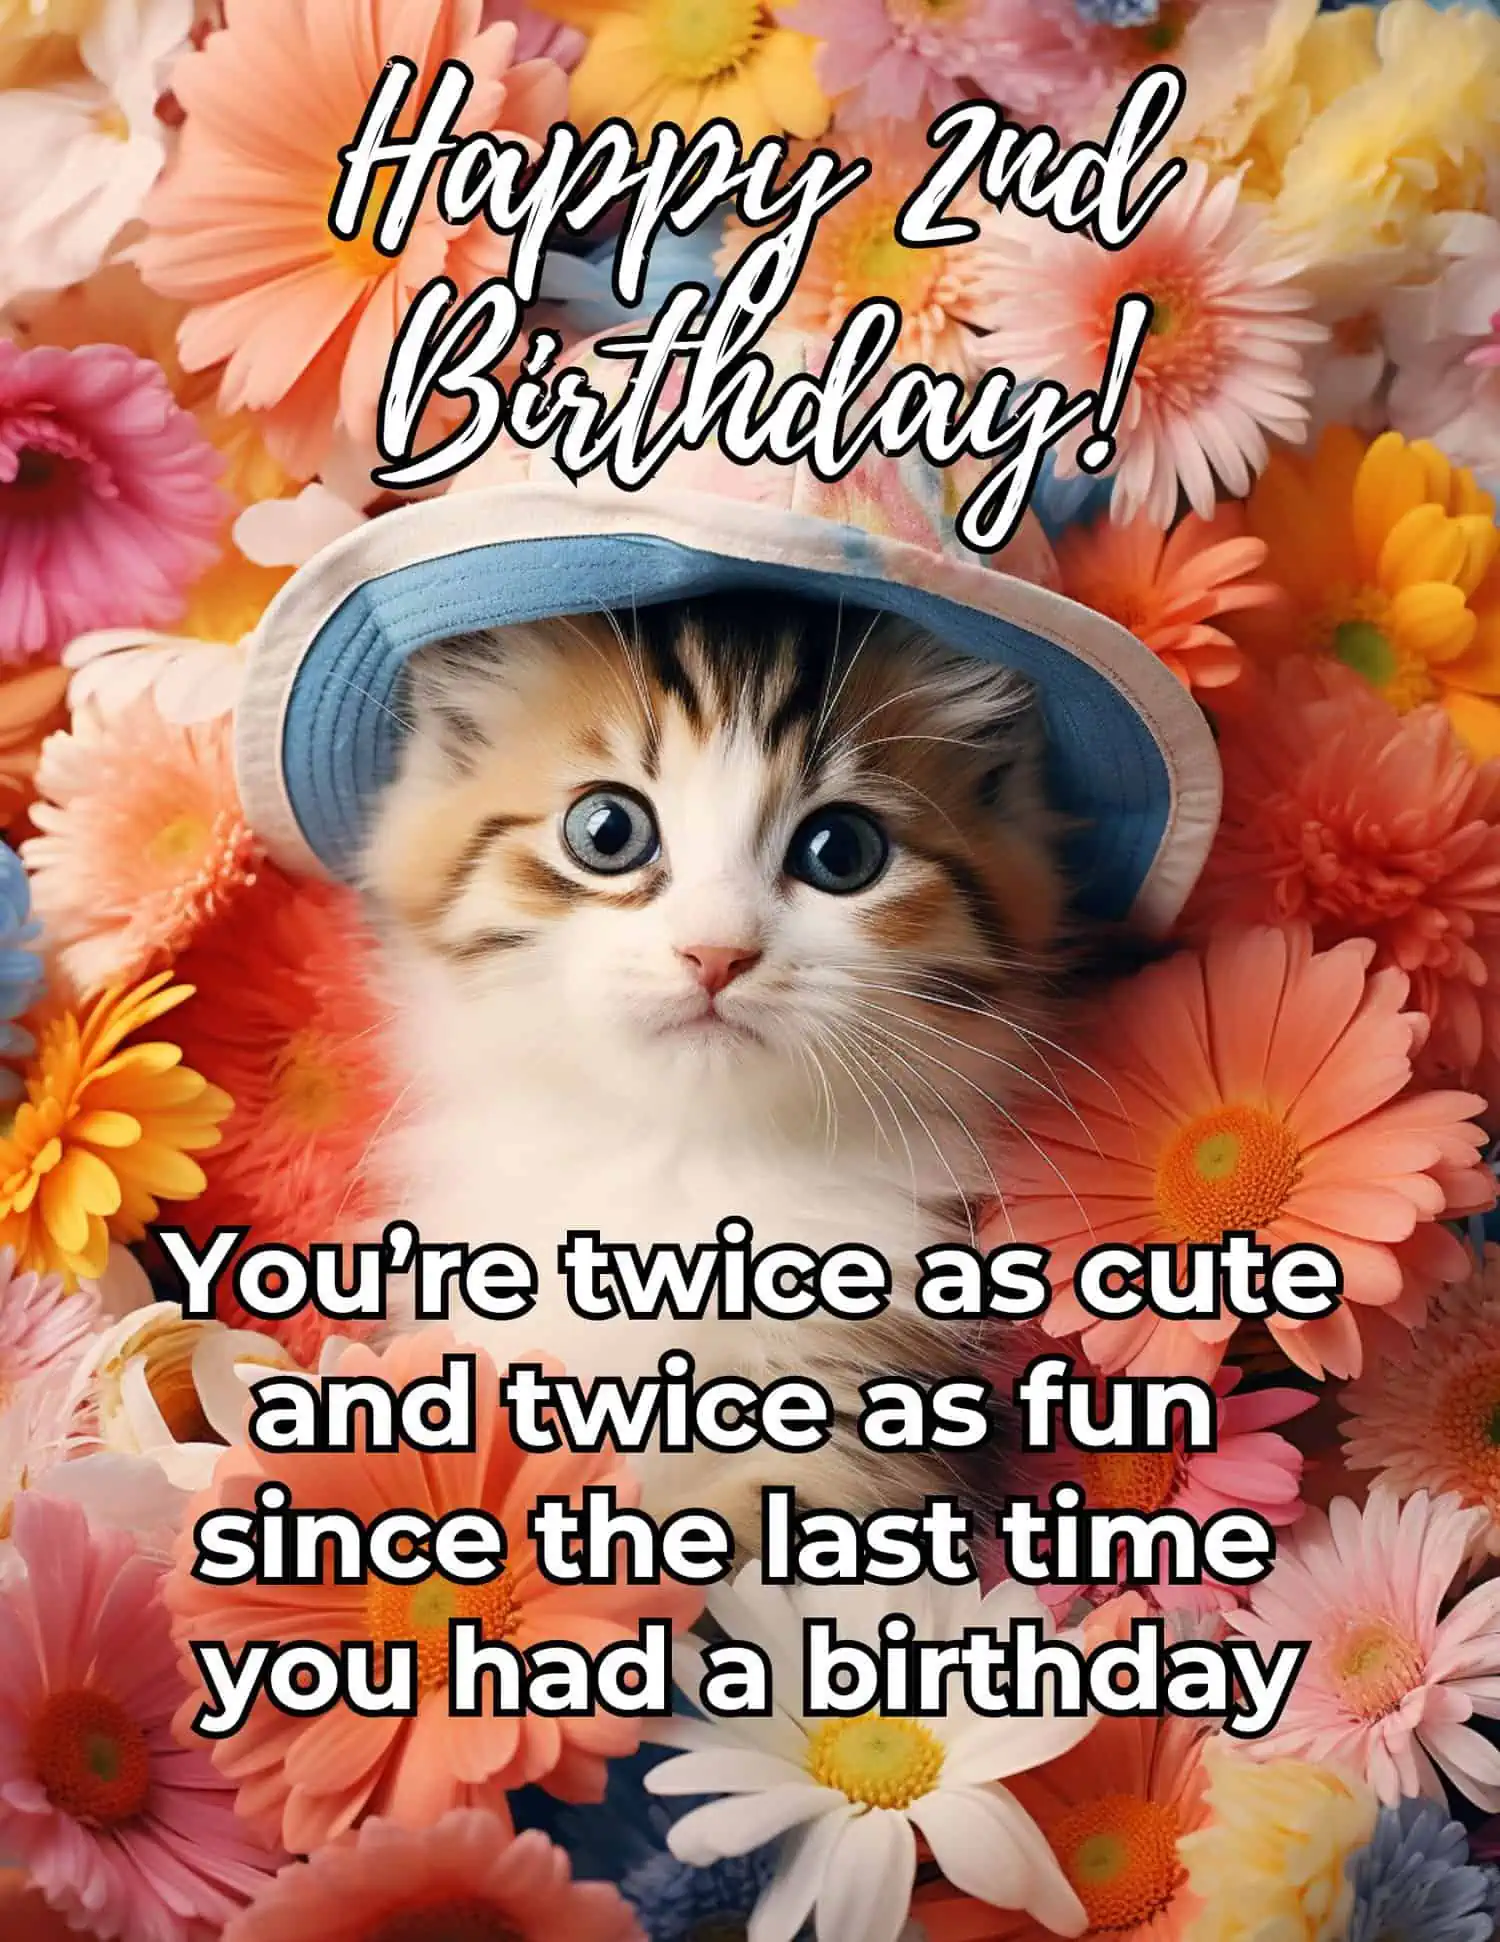 Humorous and lighthearted birthday wishes for a child's second birthday, bringing smiles and laughter.